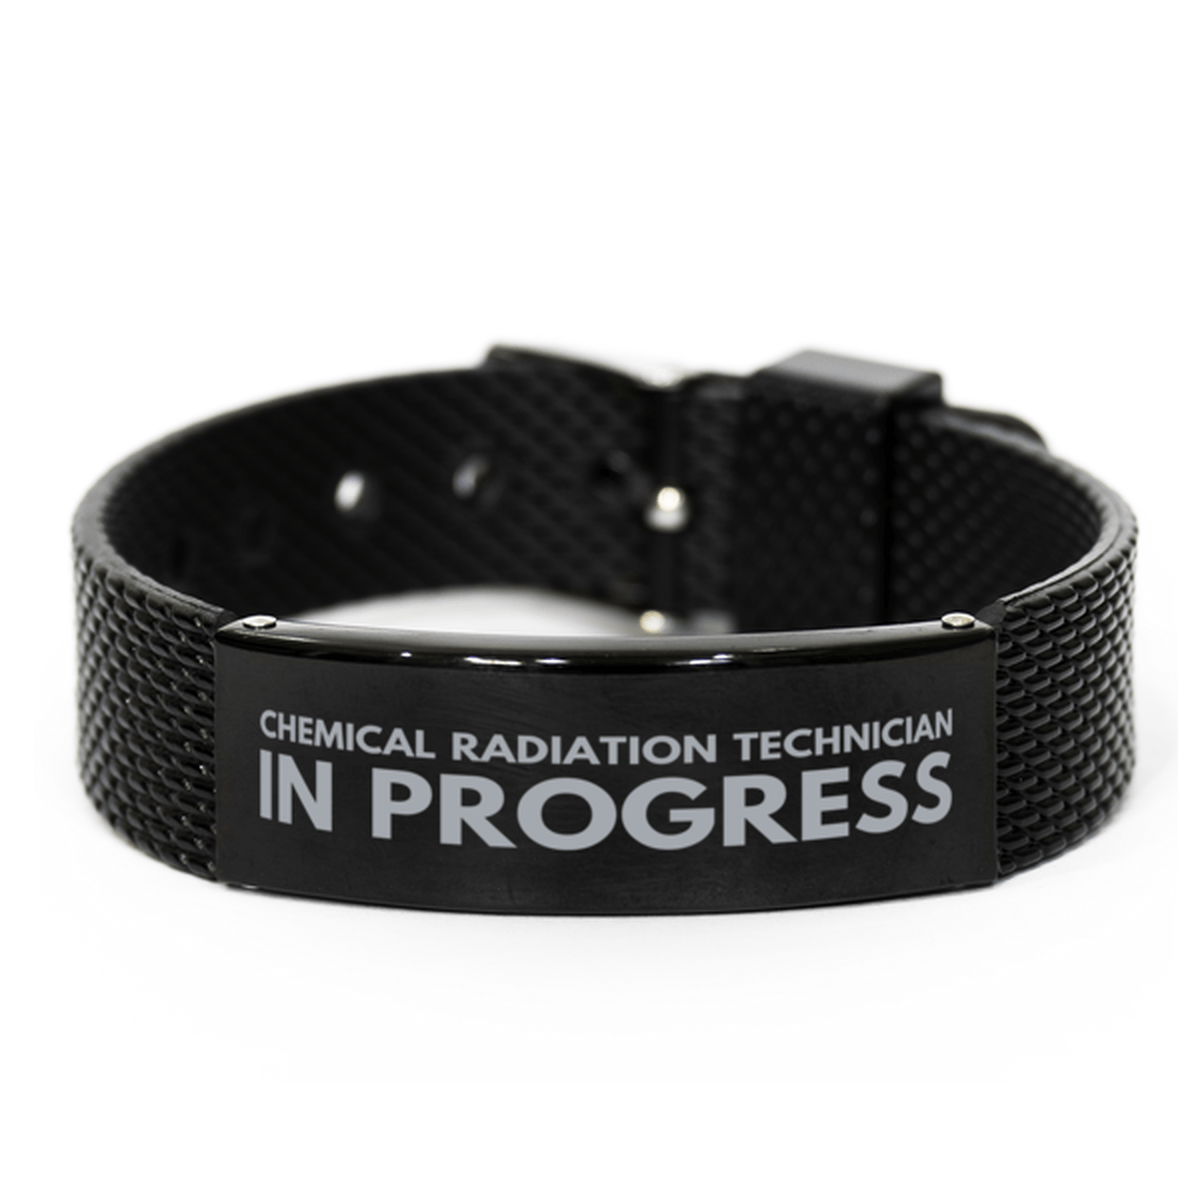 Inspirational Chemical Radiation Technician Black Shark Mesh Bracelet, Chemical Radiation Technician In Progress, Best Graduation Gifts for Students